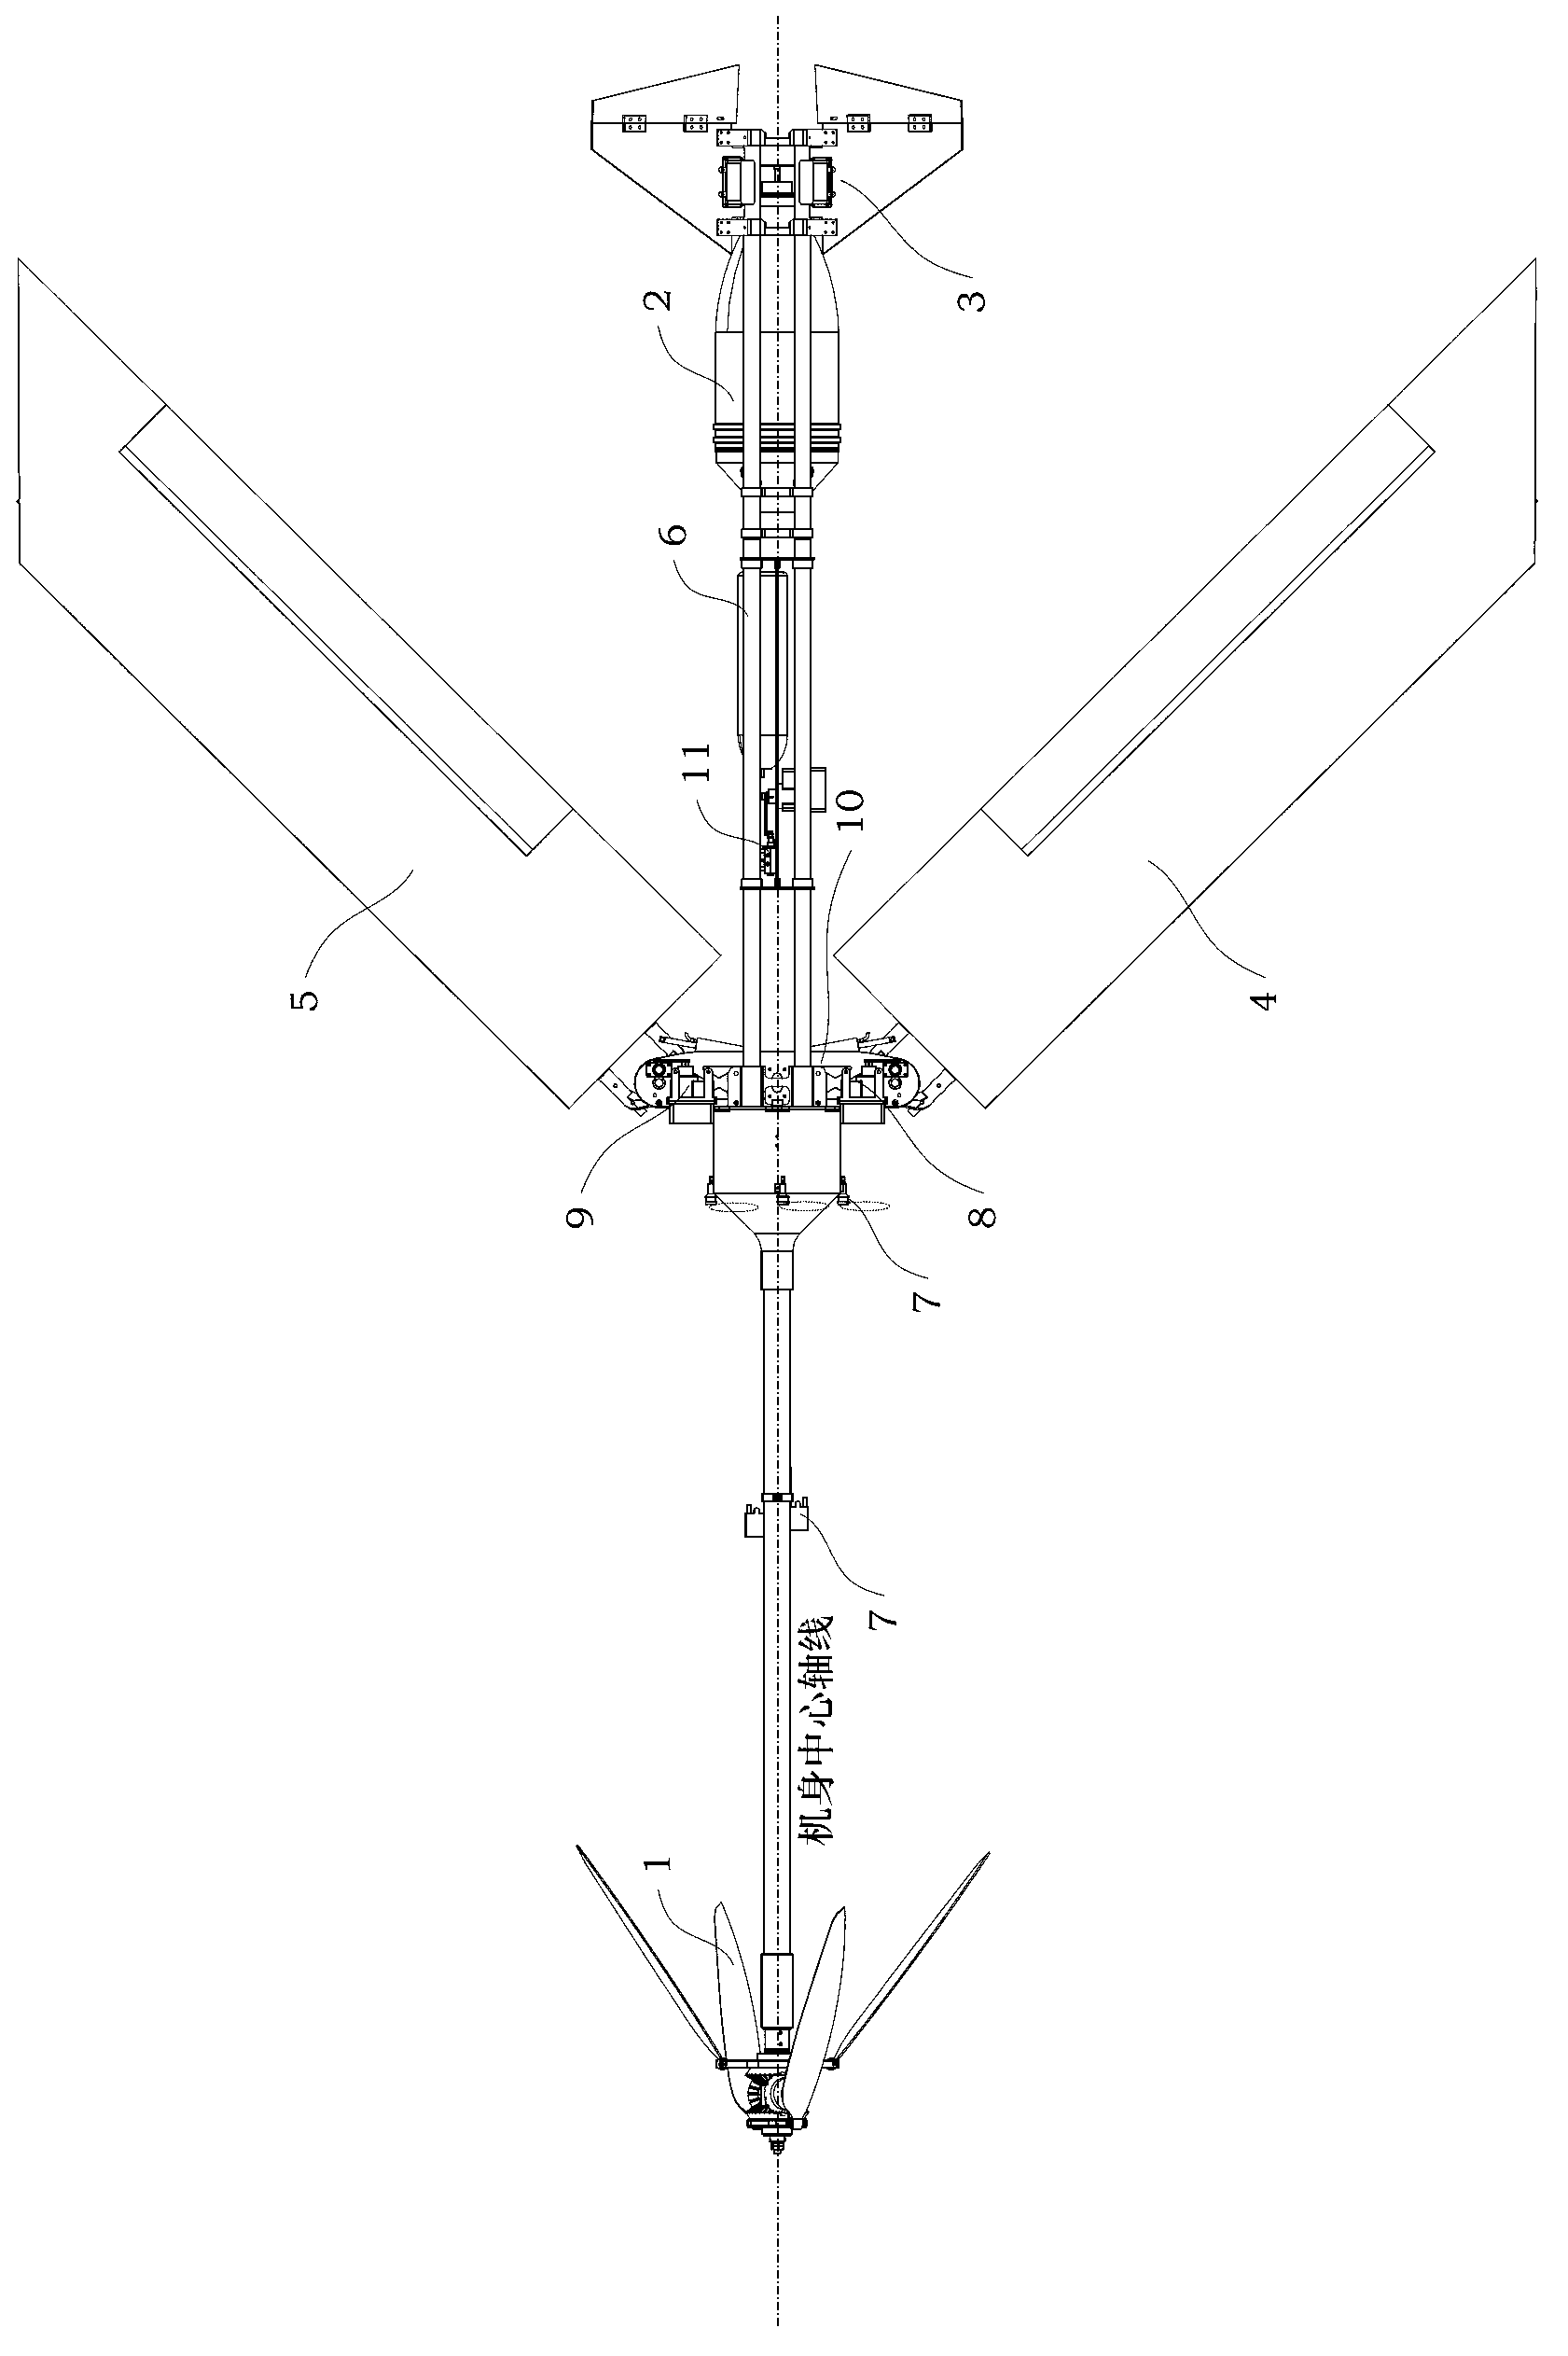 Pneumatic folding apparatus of variable-wing sweepback angle suitable for aeronaval unmanned aerial vehicle